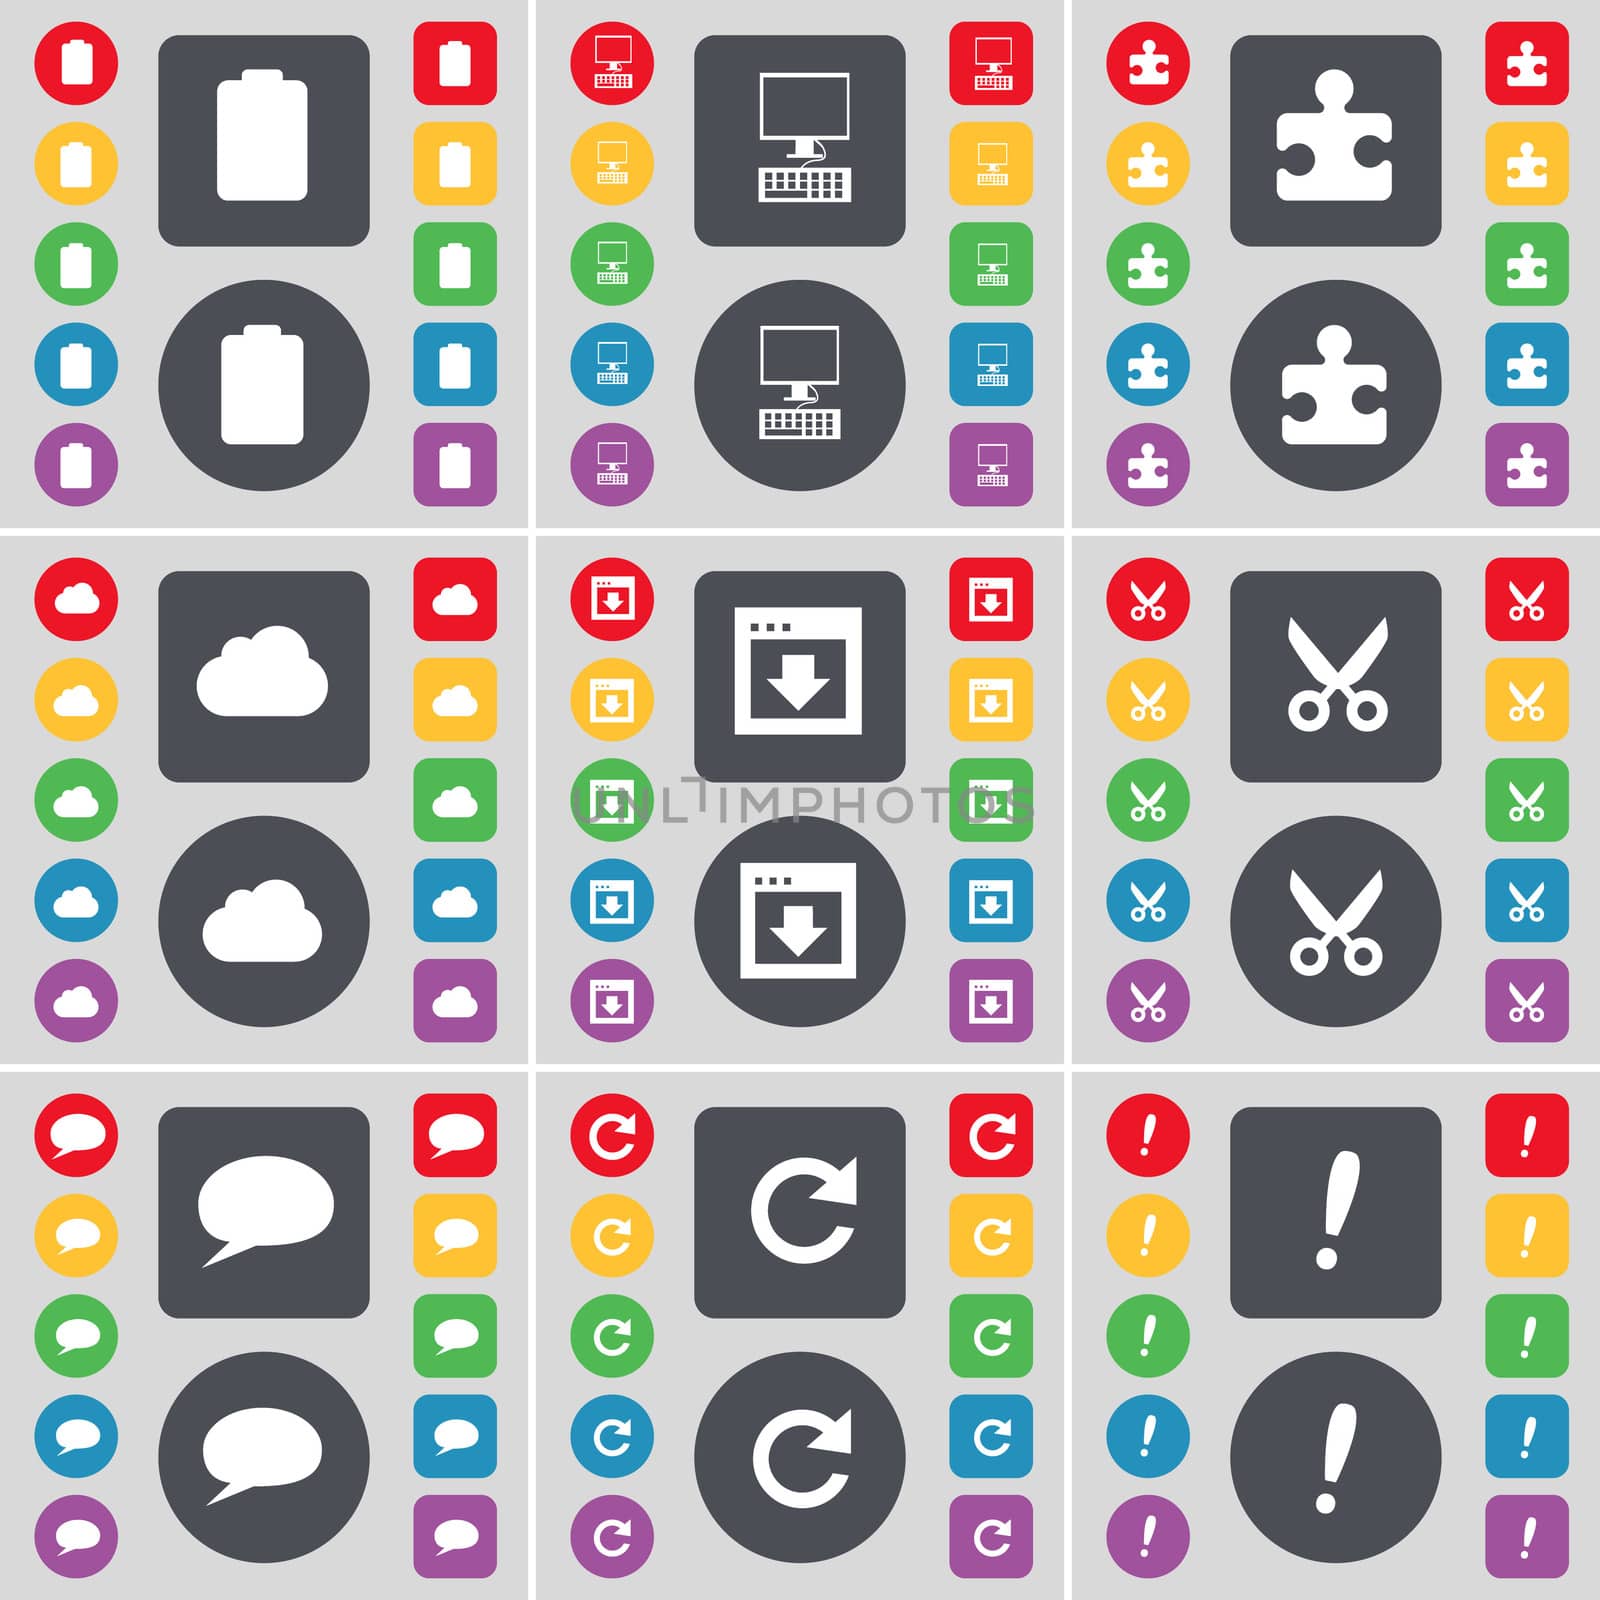 Battery, PC, Puzzle part, Cloud, Window, Airplane, Chat bubble, Reload, Exclamation mark icon symbol. A large set of flat, colored buttons for your design.  by serhii_lohvyniuk